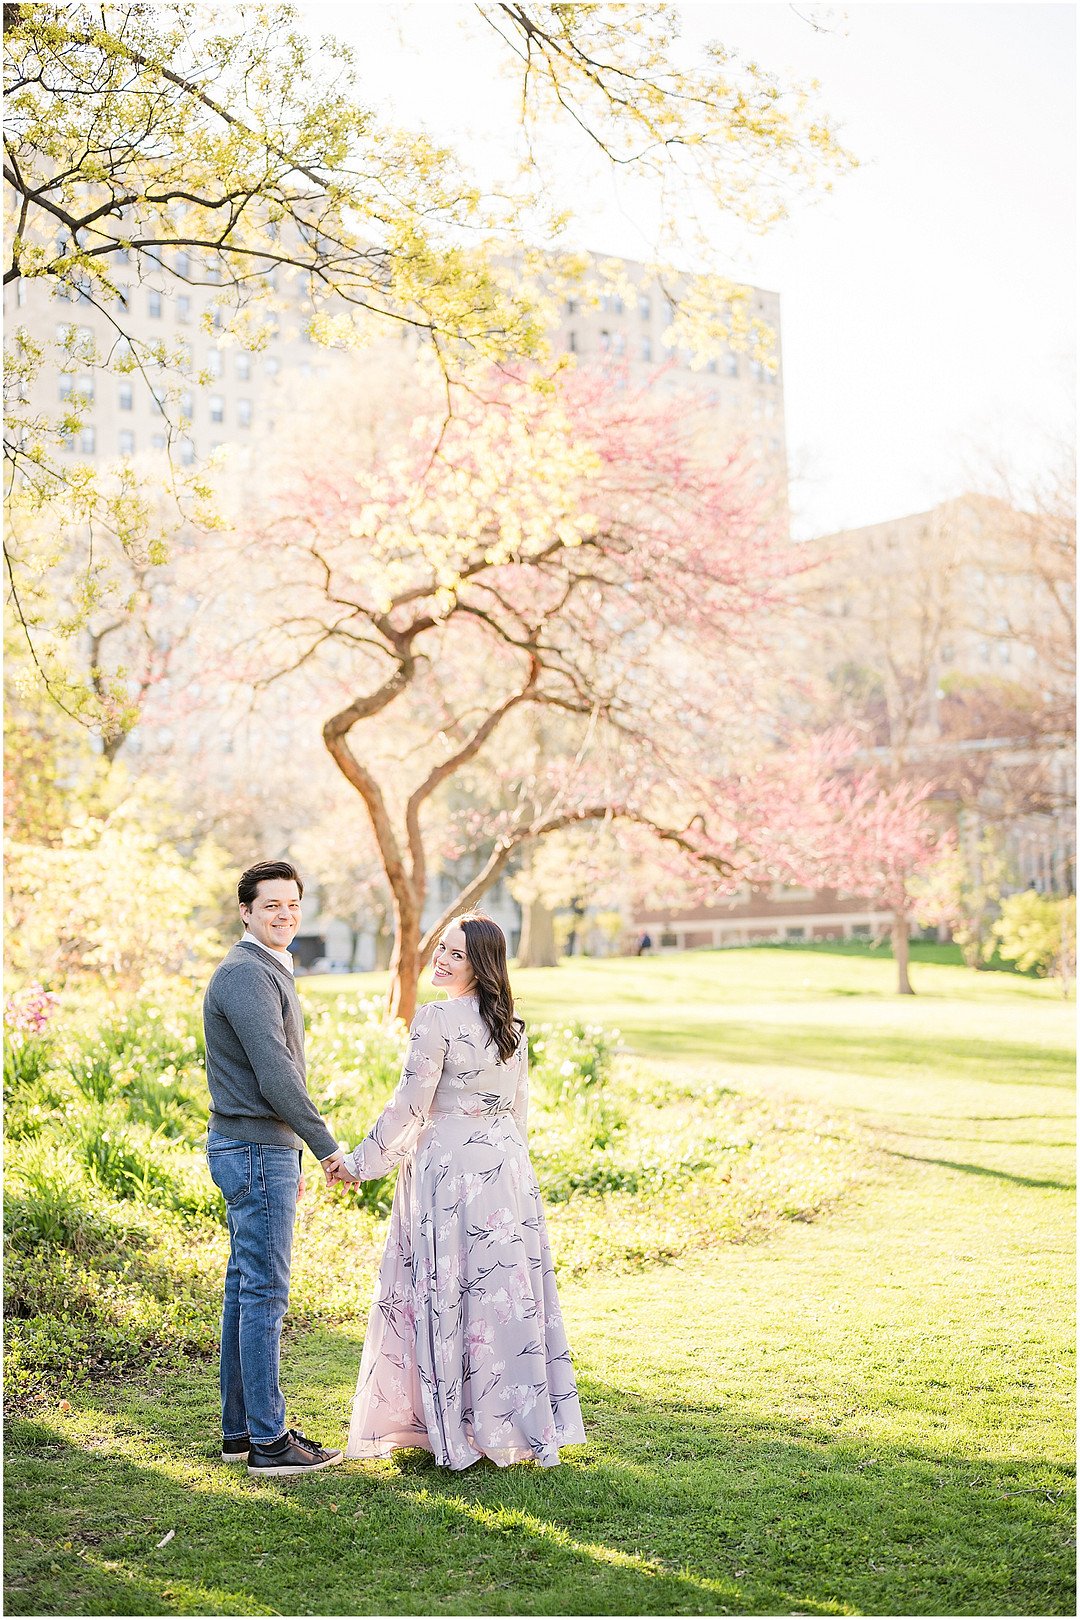 shoemaker_WitKowski_Winterlyn Photography_Lincoln Park Chicago Engagement _0197_low.jpg